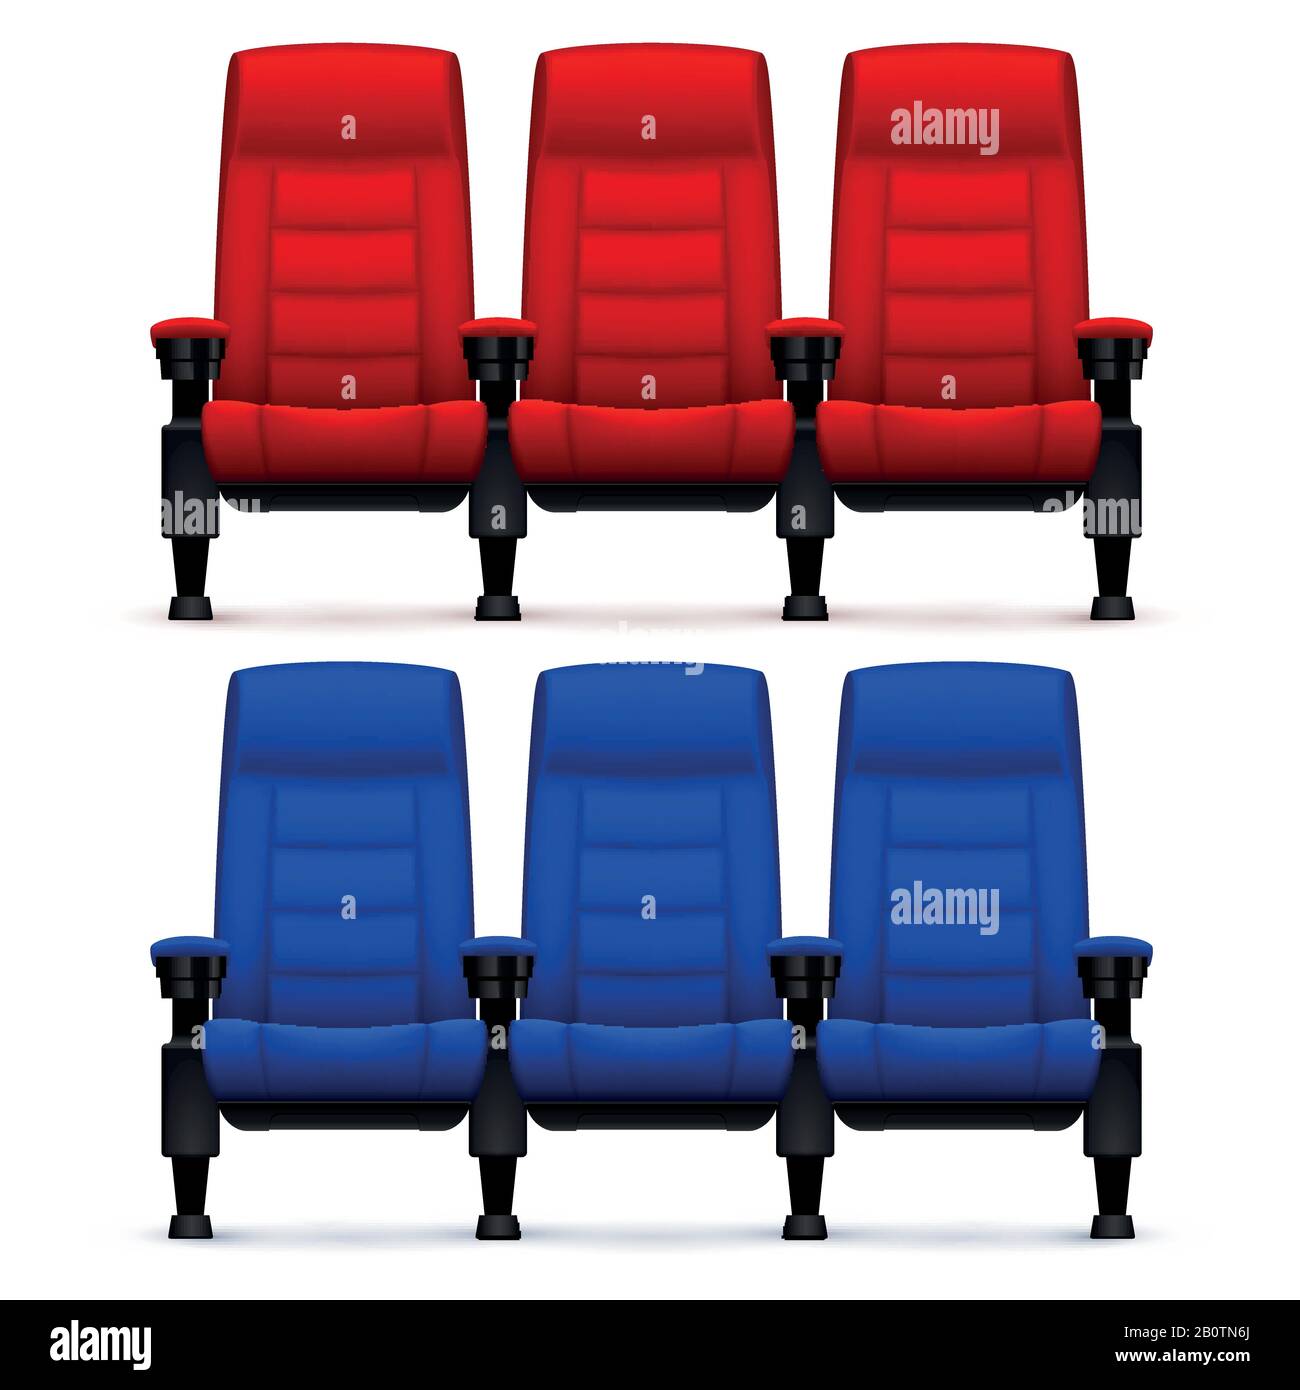 Cinema empty comfortable chairs. Realistic movie seats vector illustration. Empty chair red and blue for seat cinema theater Stock Vector